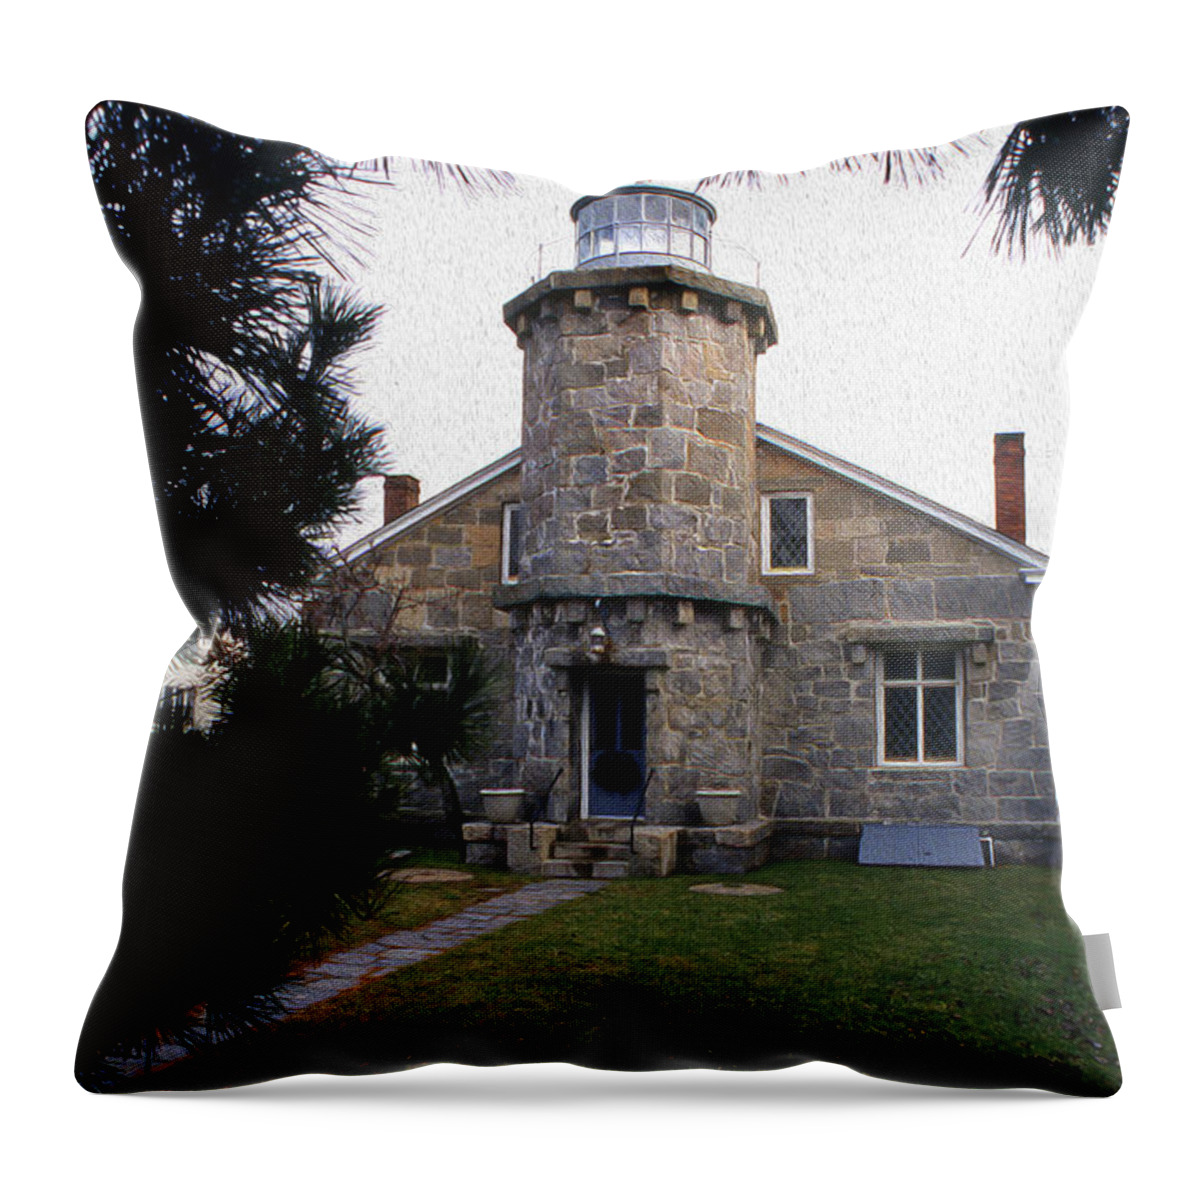 Lighthouses Throw Pillow featuring the photograph Painted Stonington Harbor Lighthouse by Skip Willits